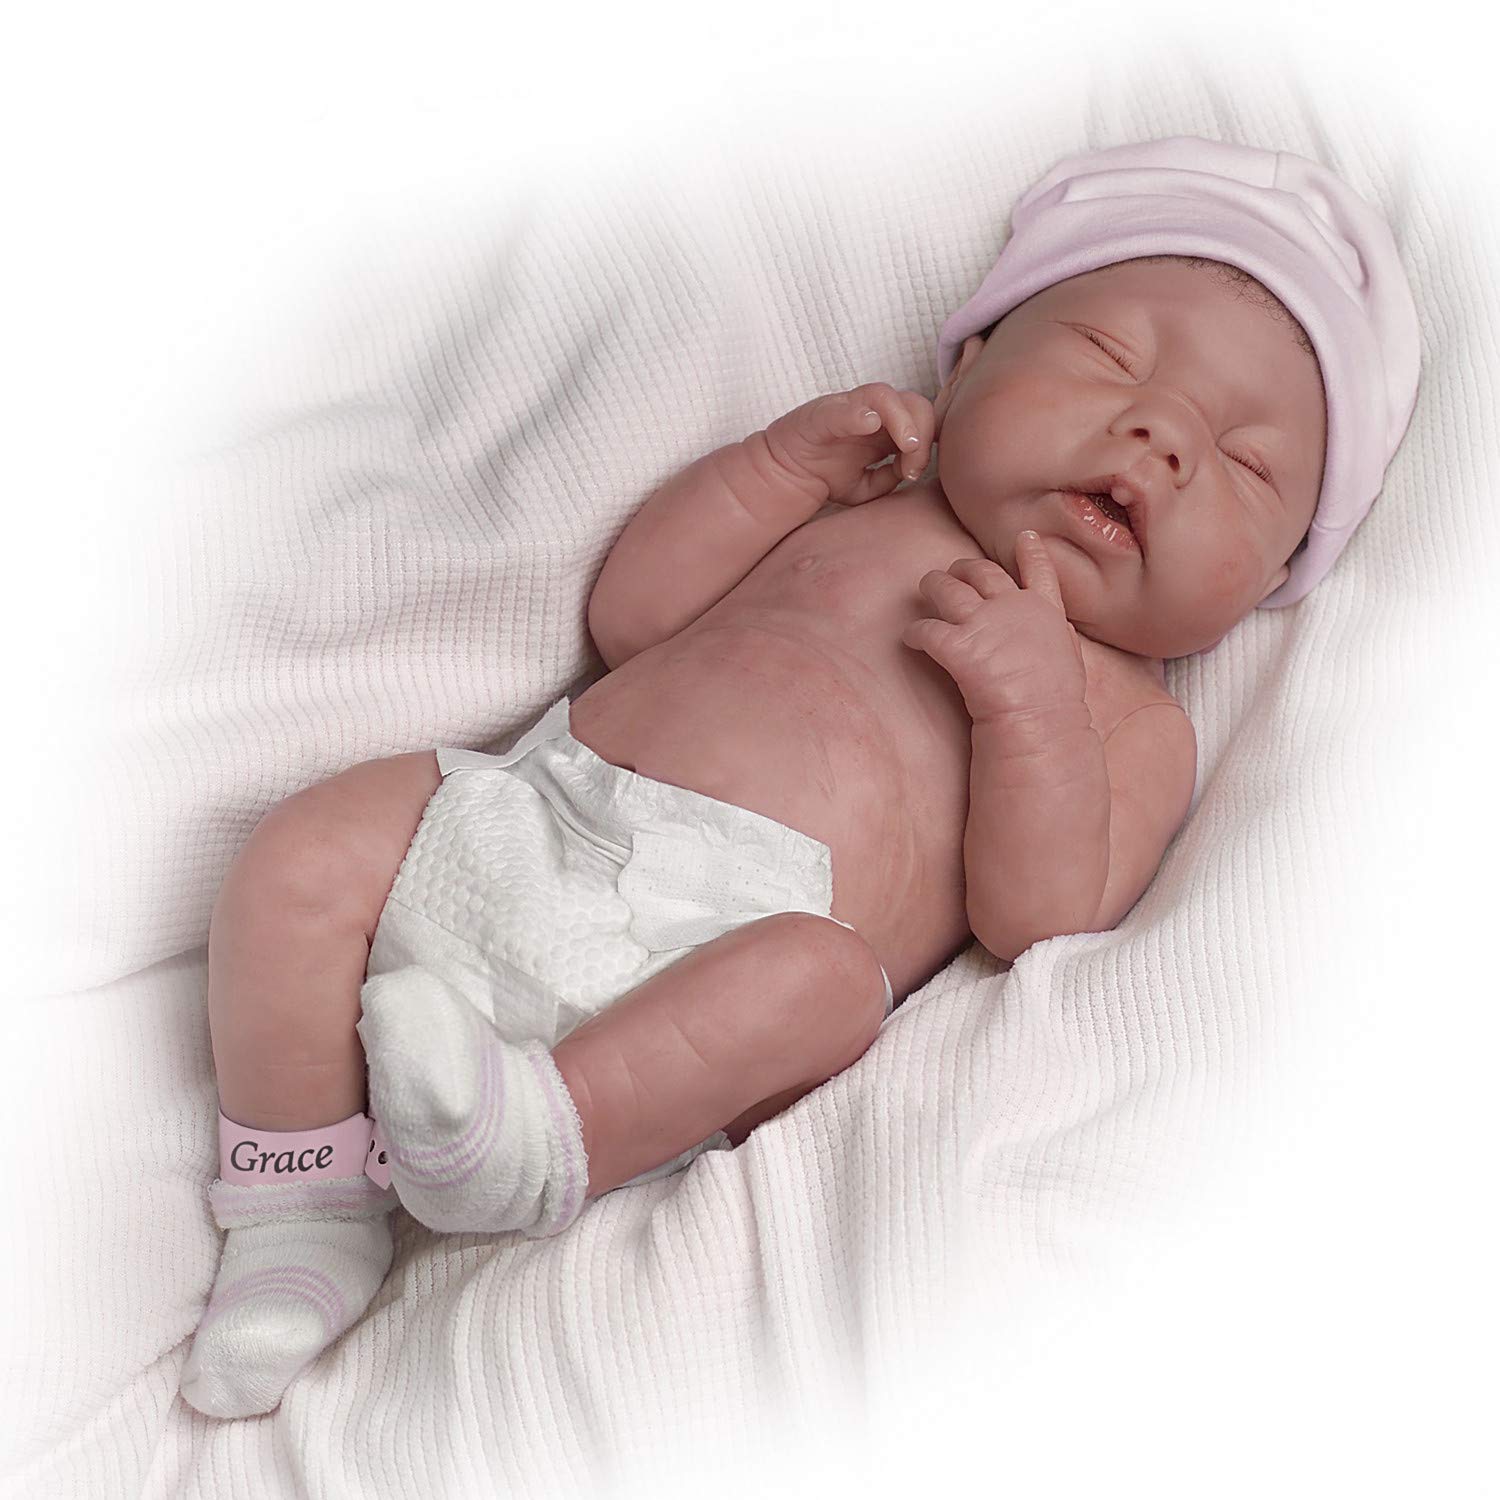 May God Bless You, Little Grace Anatomically Correct So Truly Real Lifelike, Realistic Newborn Baby Doll 15.5-inches by The Ashton-Drake Galleries